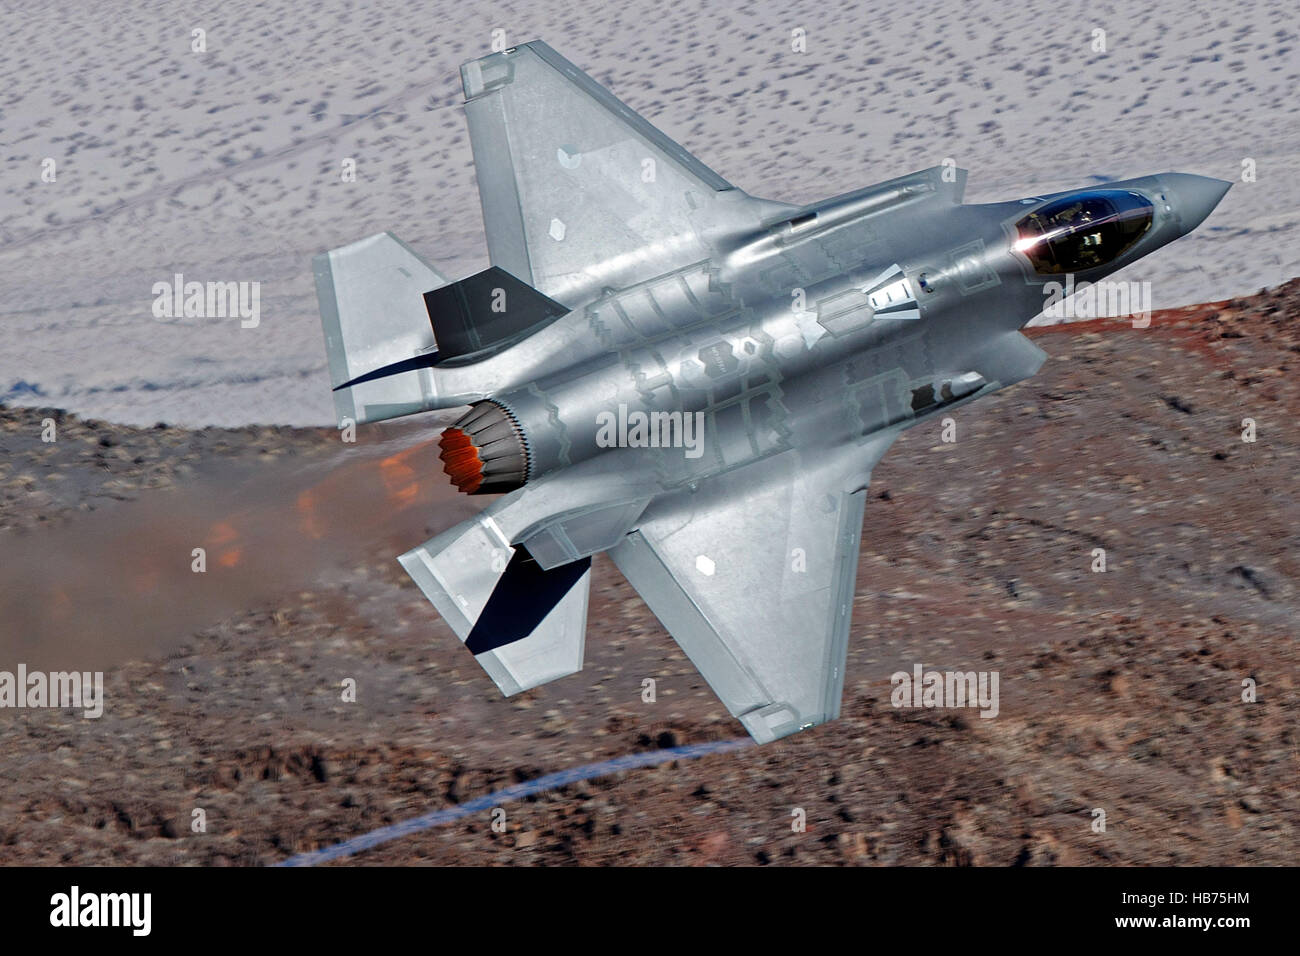 Lockheed Martin F-35A Lighting II from the 323 Squadron, Royal Netherlands Air Force, flies low level through the Jedi Transition, Star Wars Canyon, Death Valley National Park, California, United States of America Stock Photo